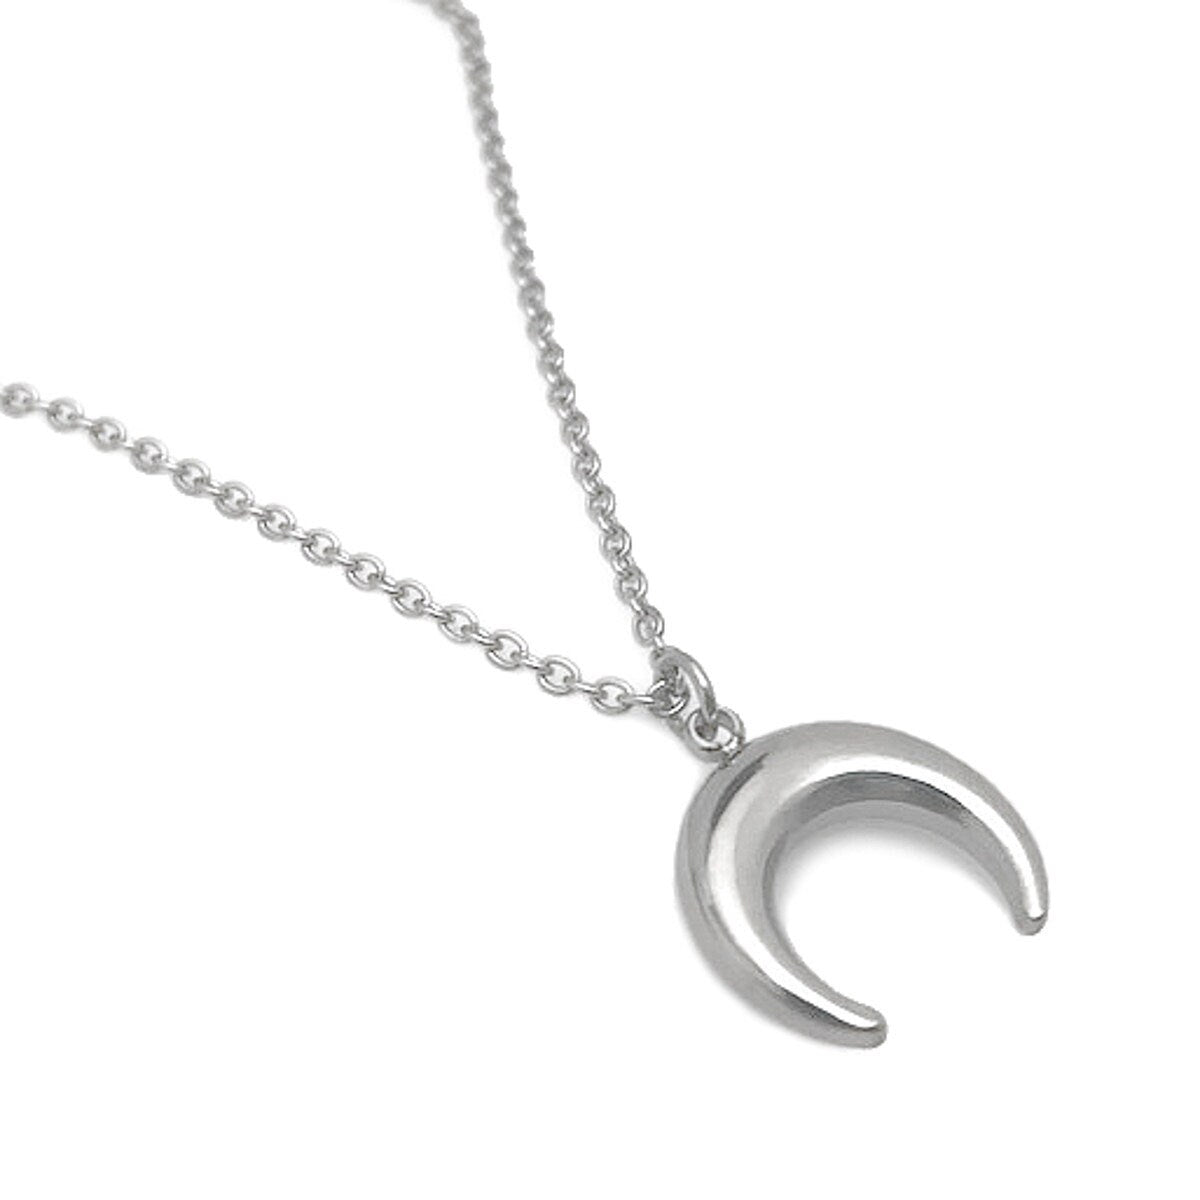 Upside Down Moon Necklace, Double Horn Jewelry, Crescent Pendant, Layering Necklace, Minimalist Style, Half Moon